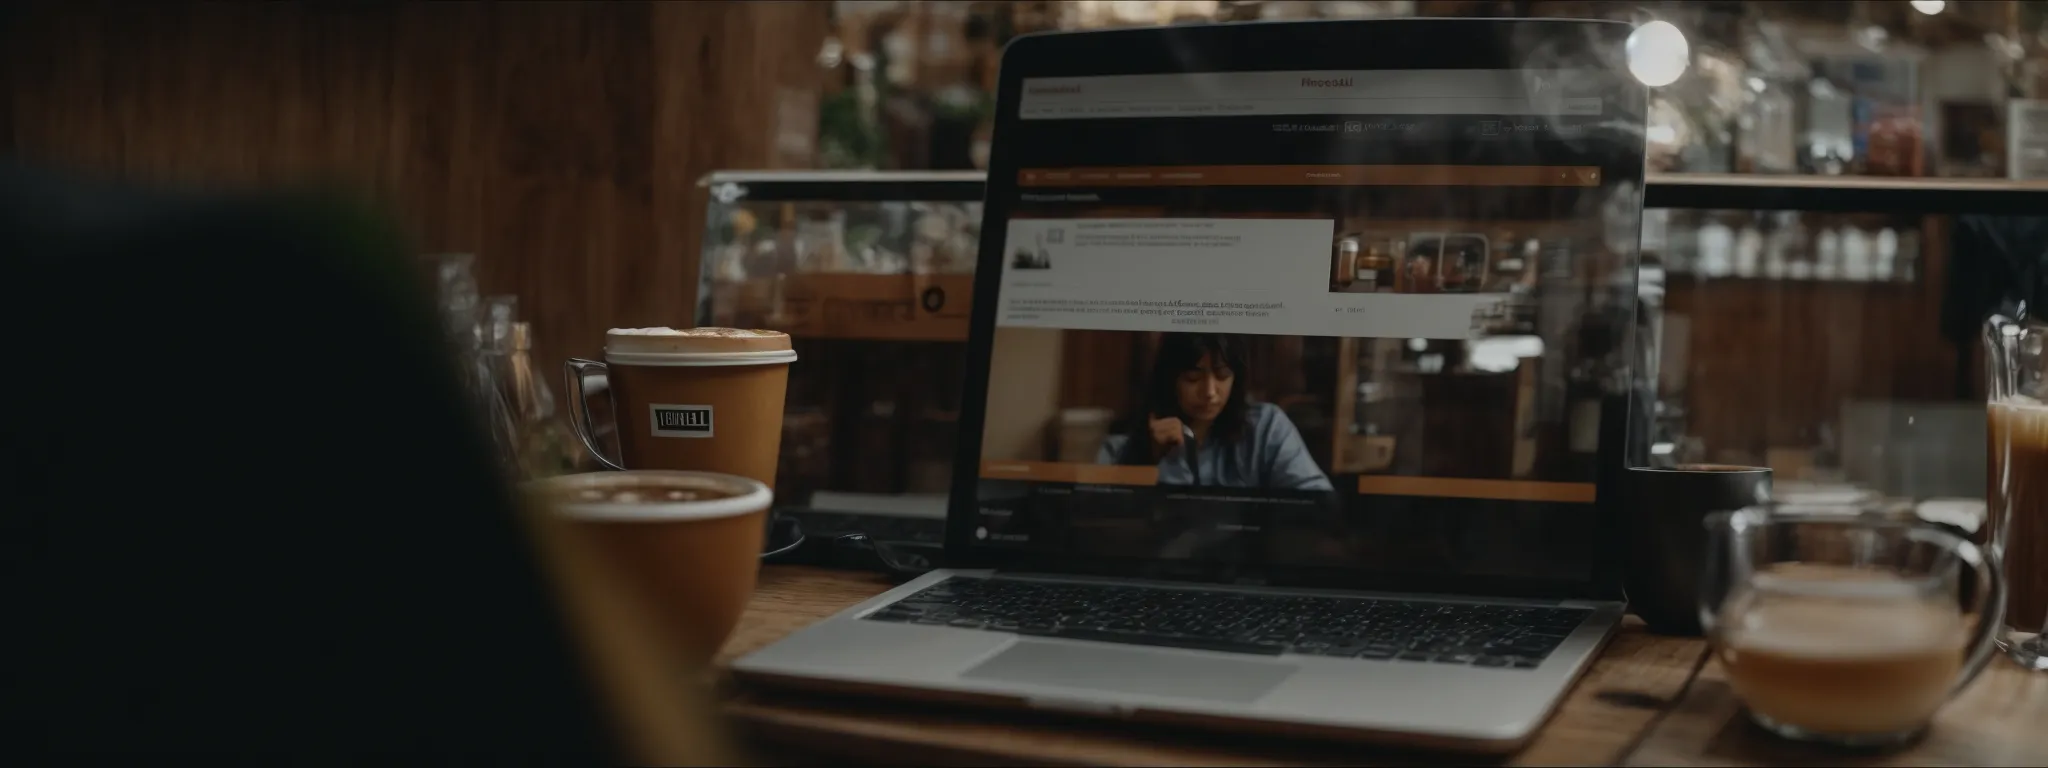 a shopkeeper optimizes their online business profile on a laptop in a cozy coffee shop.